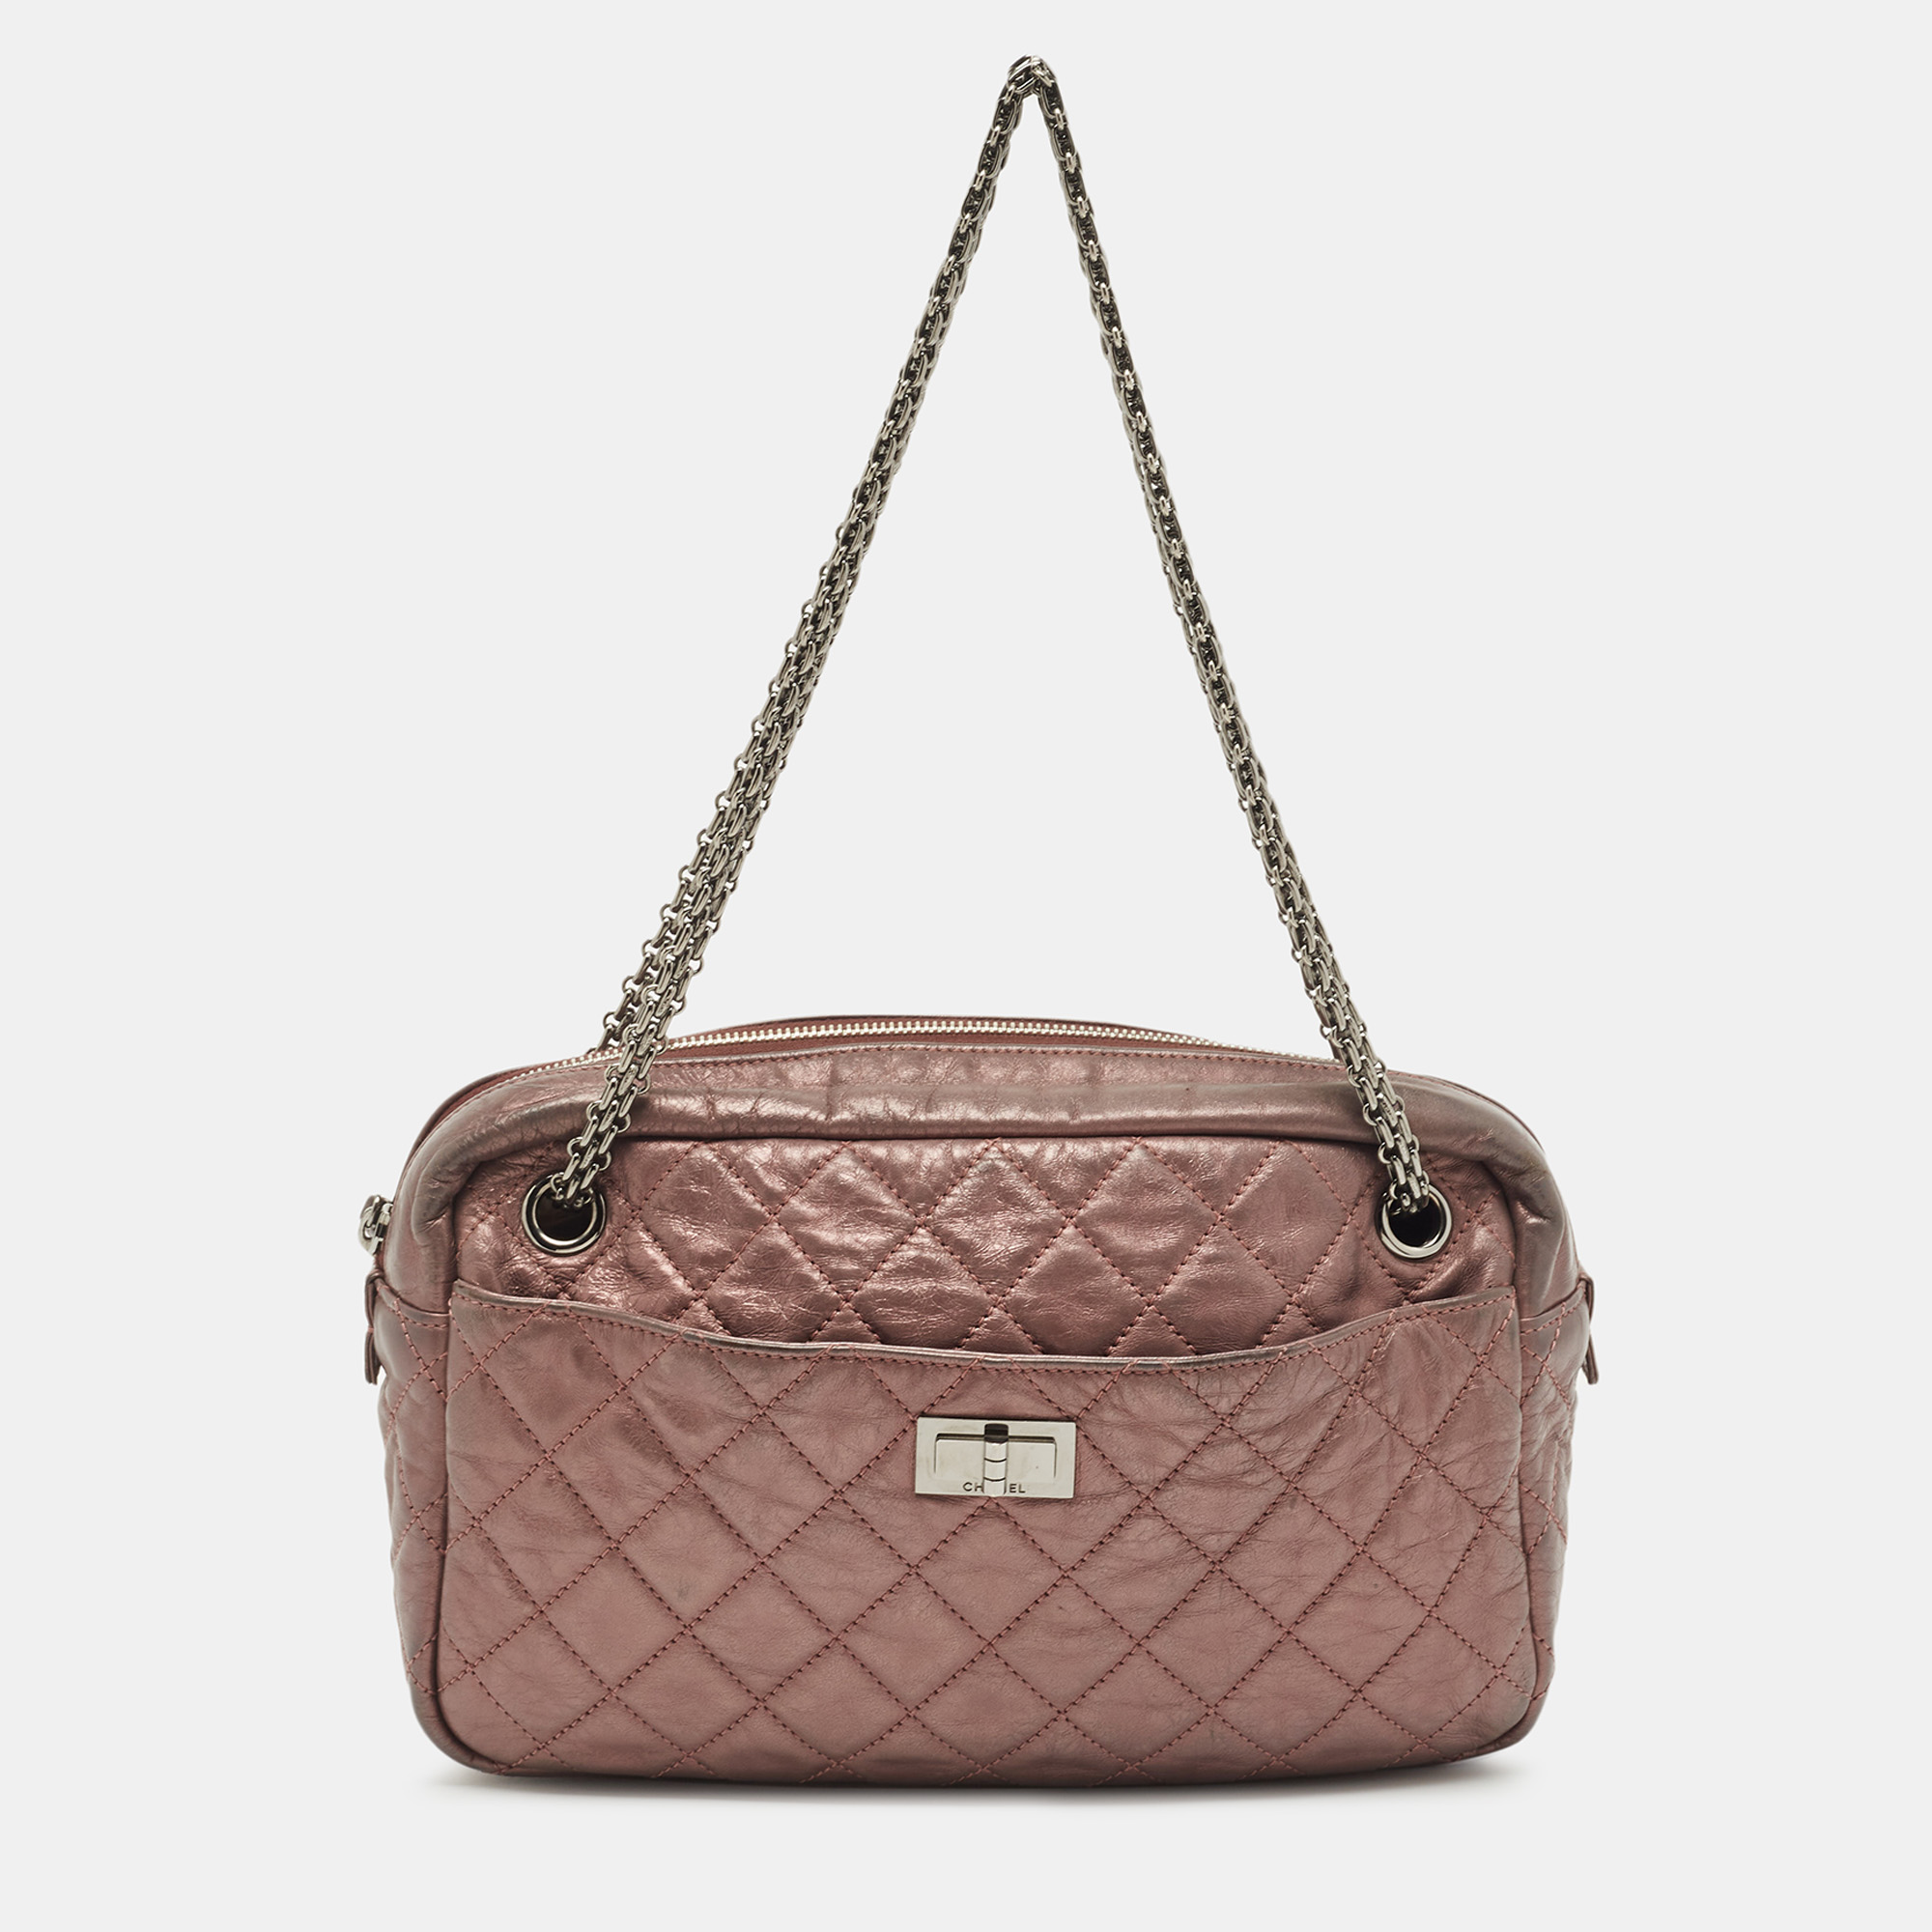 Chanel metallic old rose crinkled quilted leather reissue camera bag